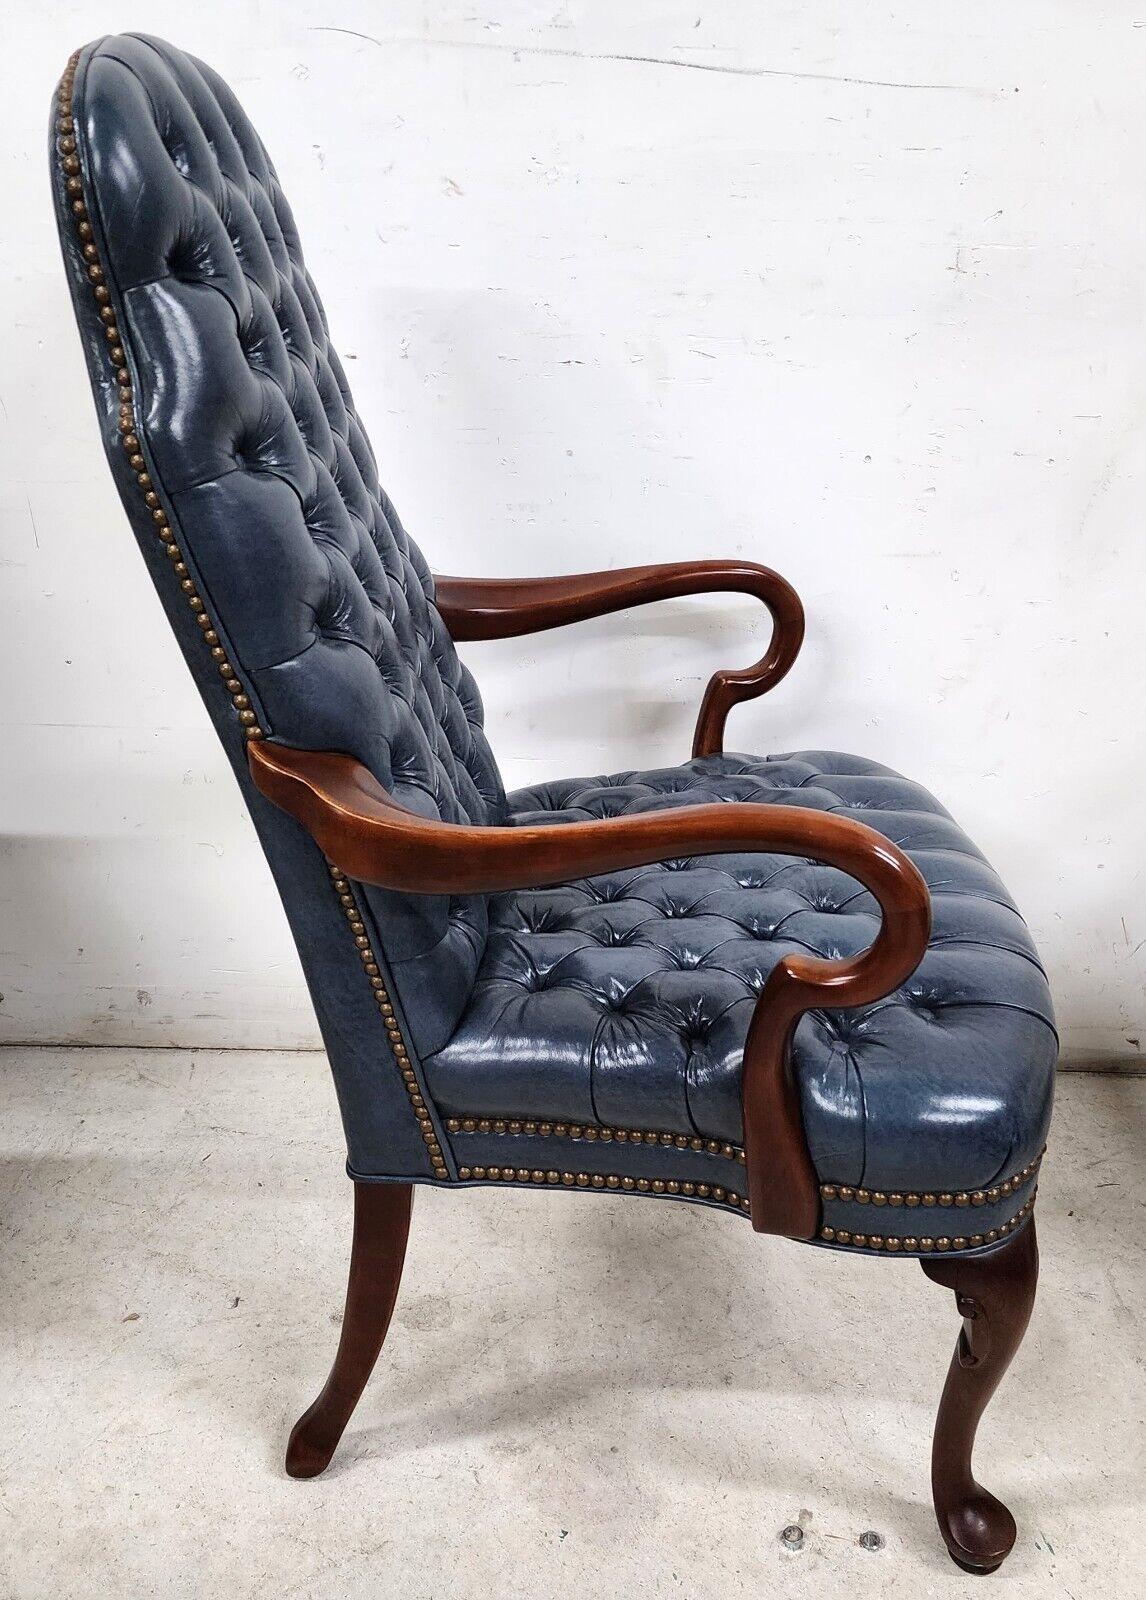 Late 20th Century Guerin Leather Armchair Tufted Chesterfield Slate Blue by Leathercraft